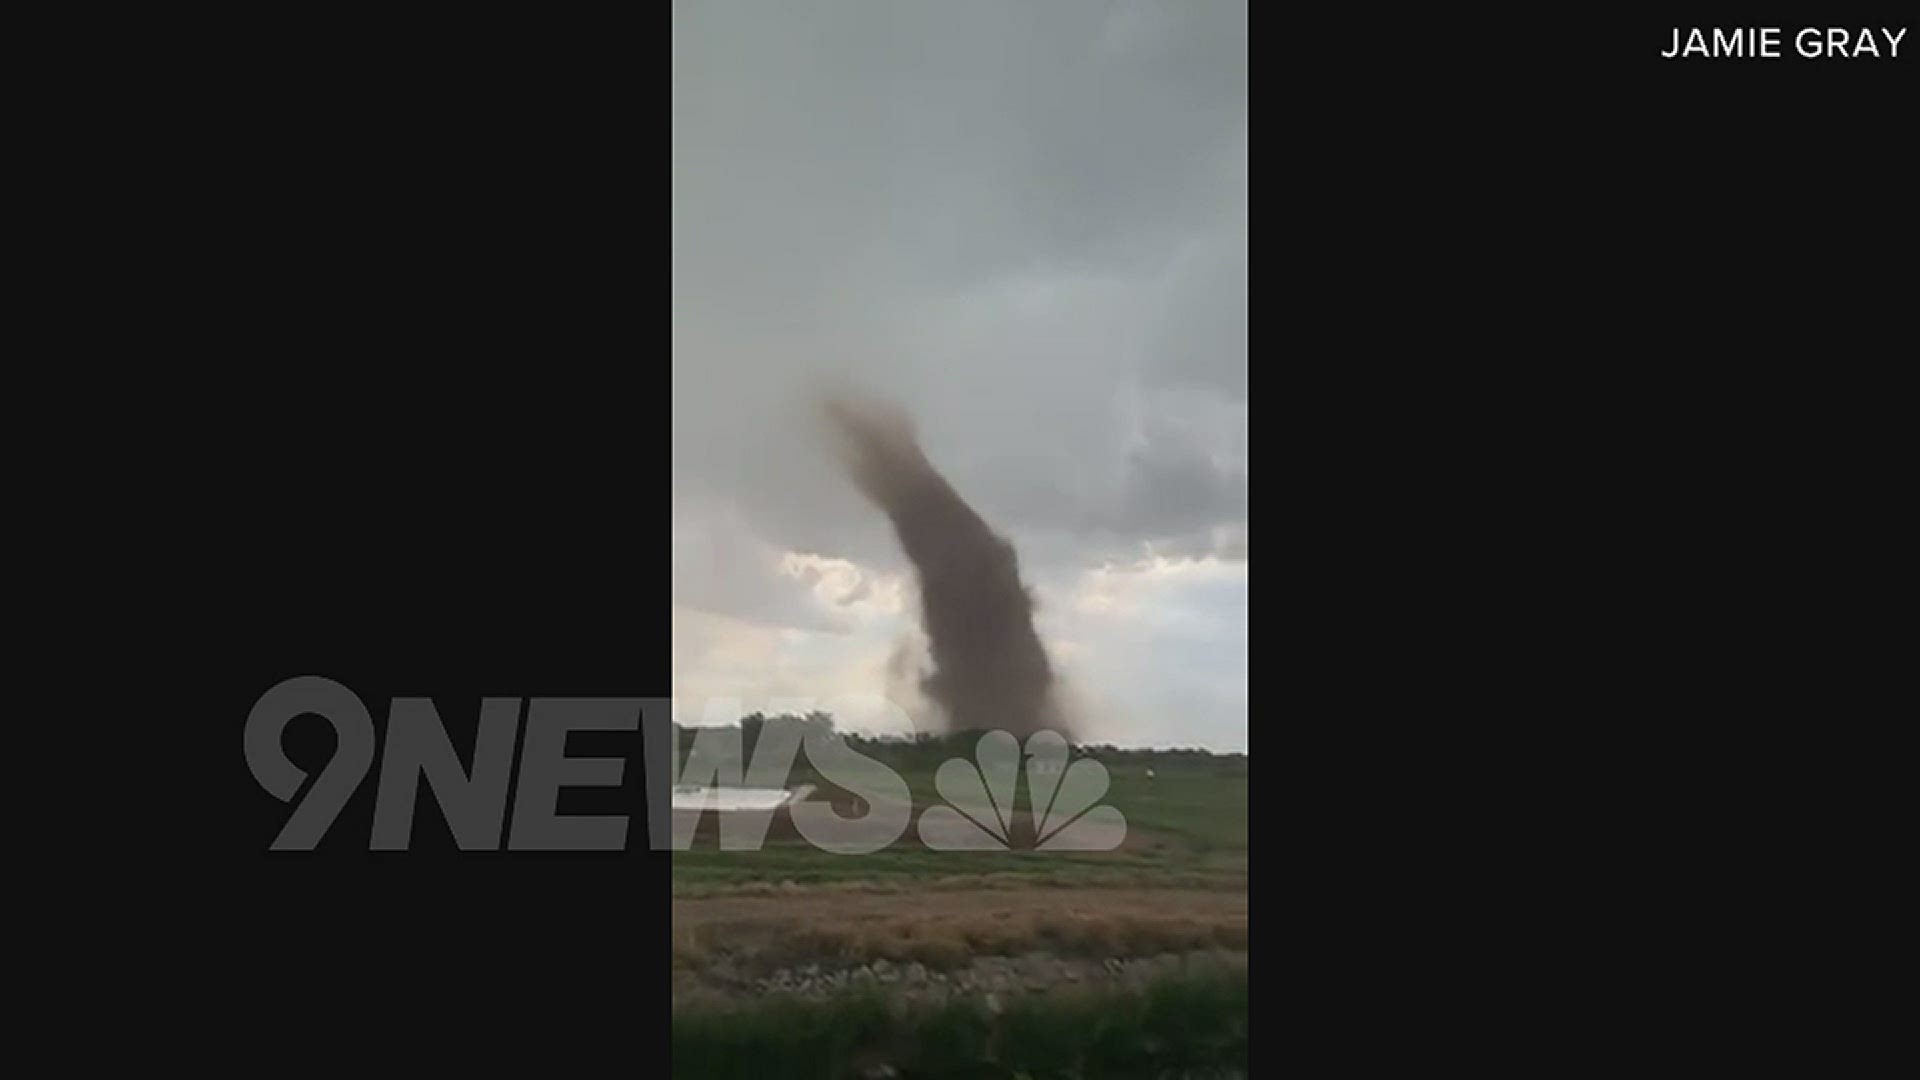 From Platteville to Mead to Firestone, 9NEWS viewers shared what they saw when a tornado hit Weld County today.